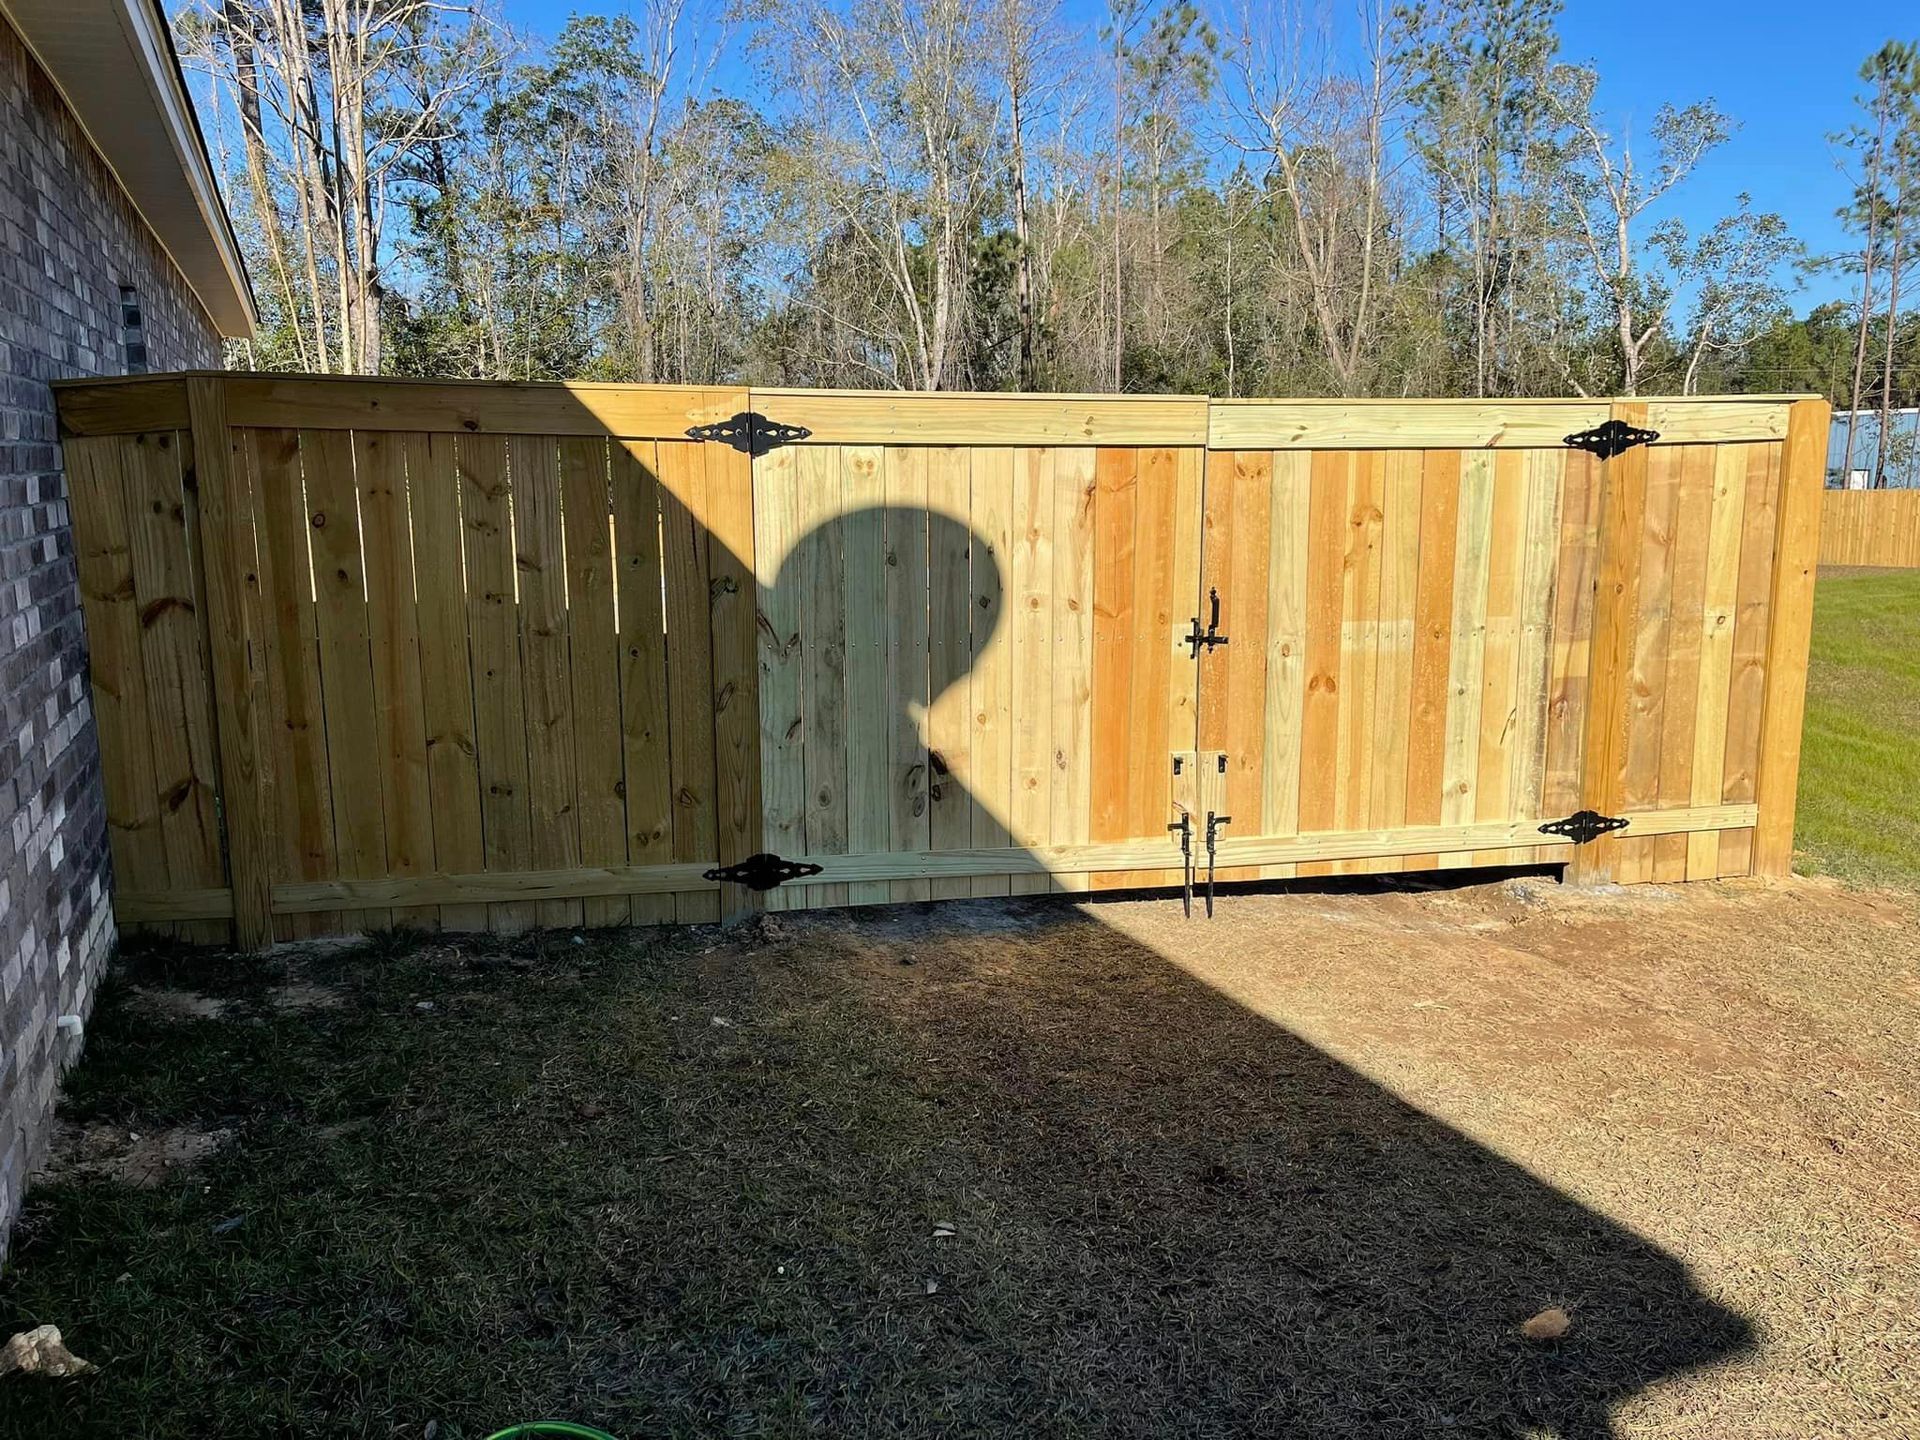 A Wooden Fence with A Gate in The Backyard - Mississippi, United States - Magnolia Fencing, LLC